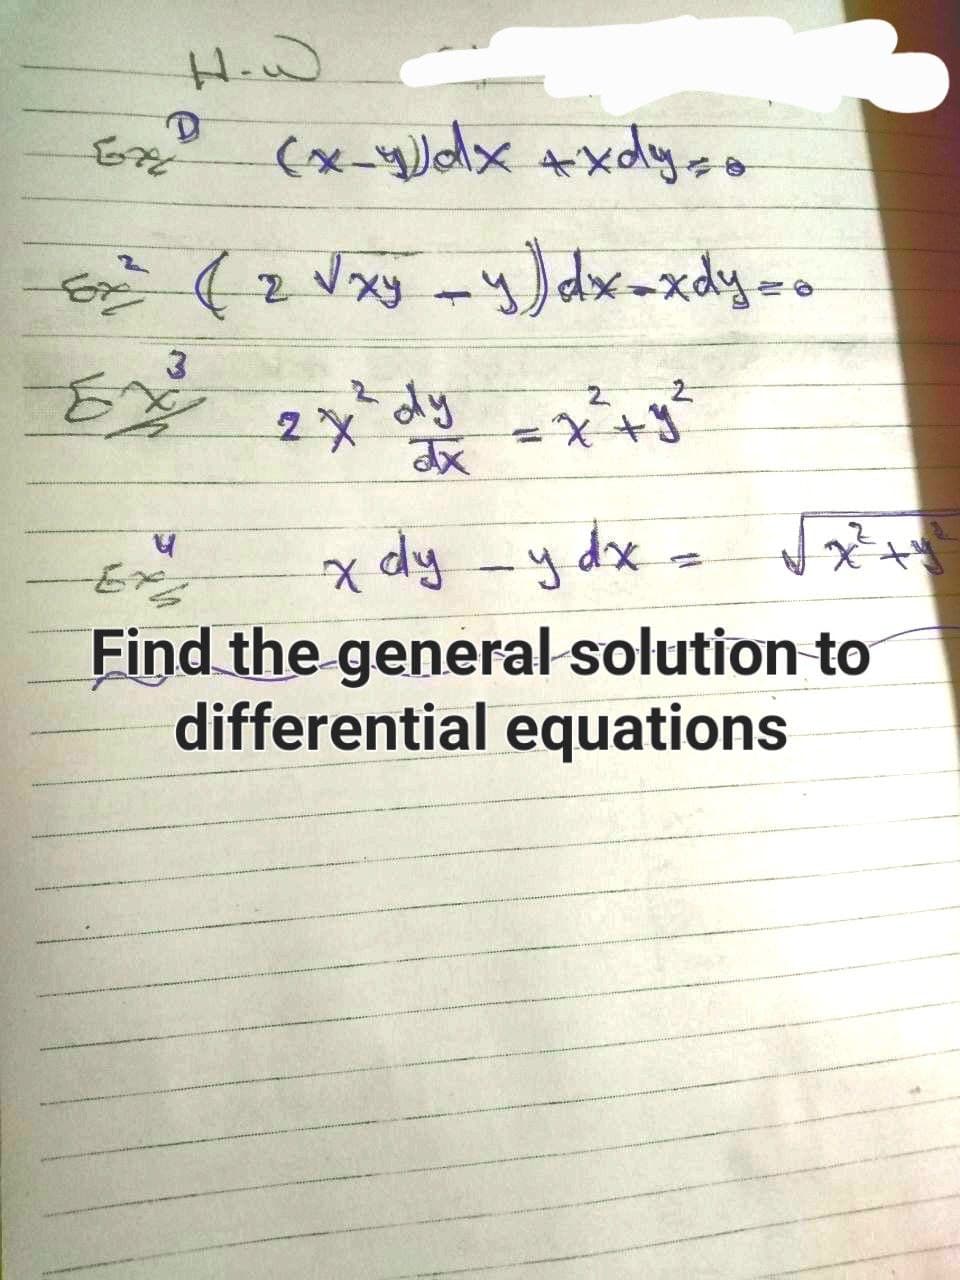 H.W
(x-1)dx +xdy so
Ex² ( 2 √xy - y) dx-xdy ==
3
Ex
² dy = x² + y²
2X
ax
h
xp h - hp x
Find the general solution to
differential equations